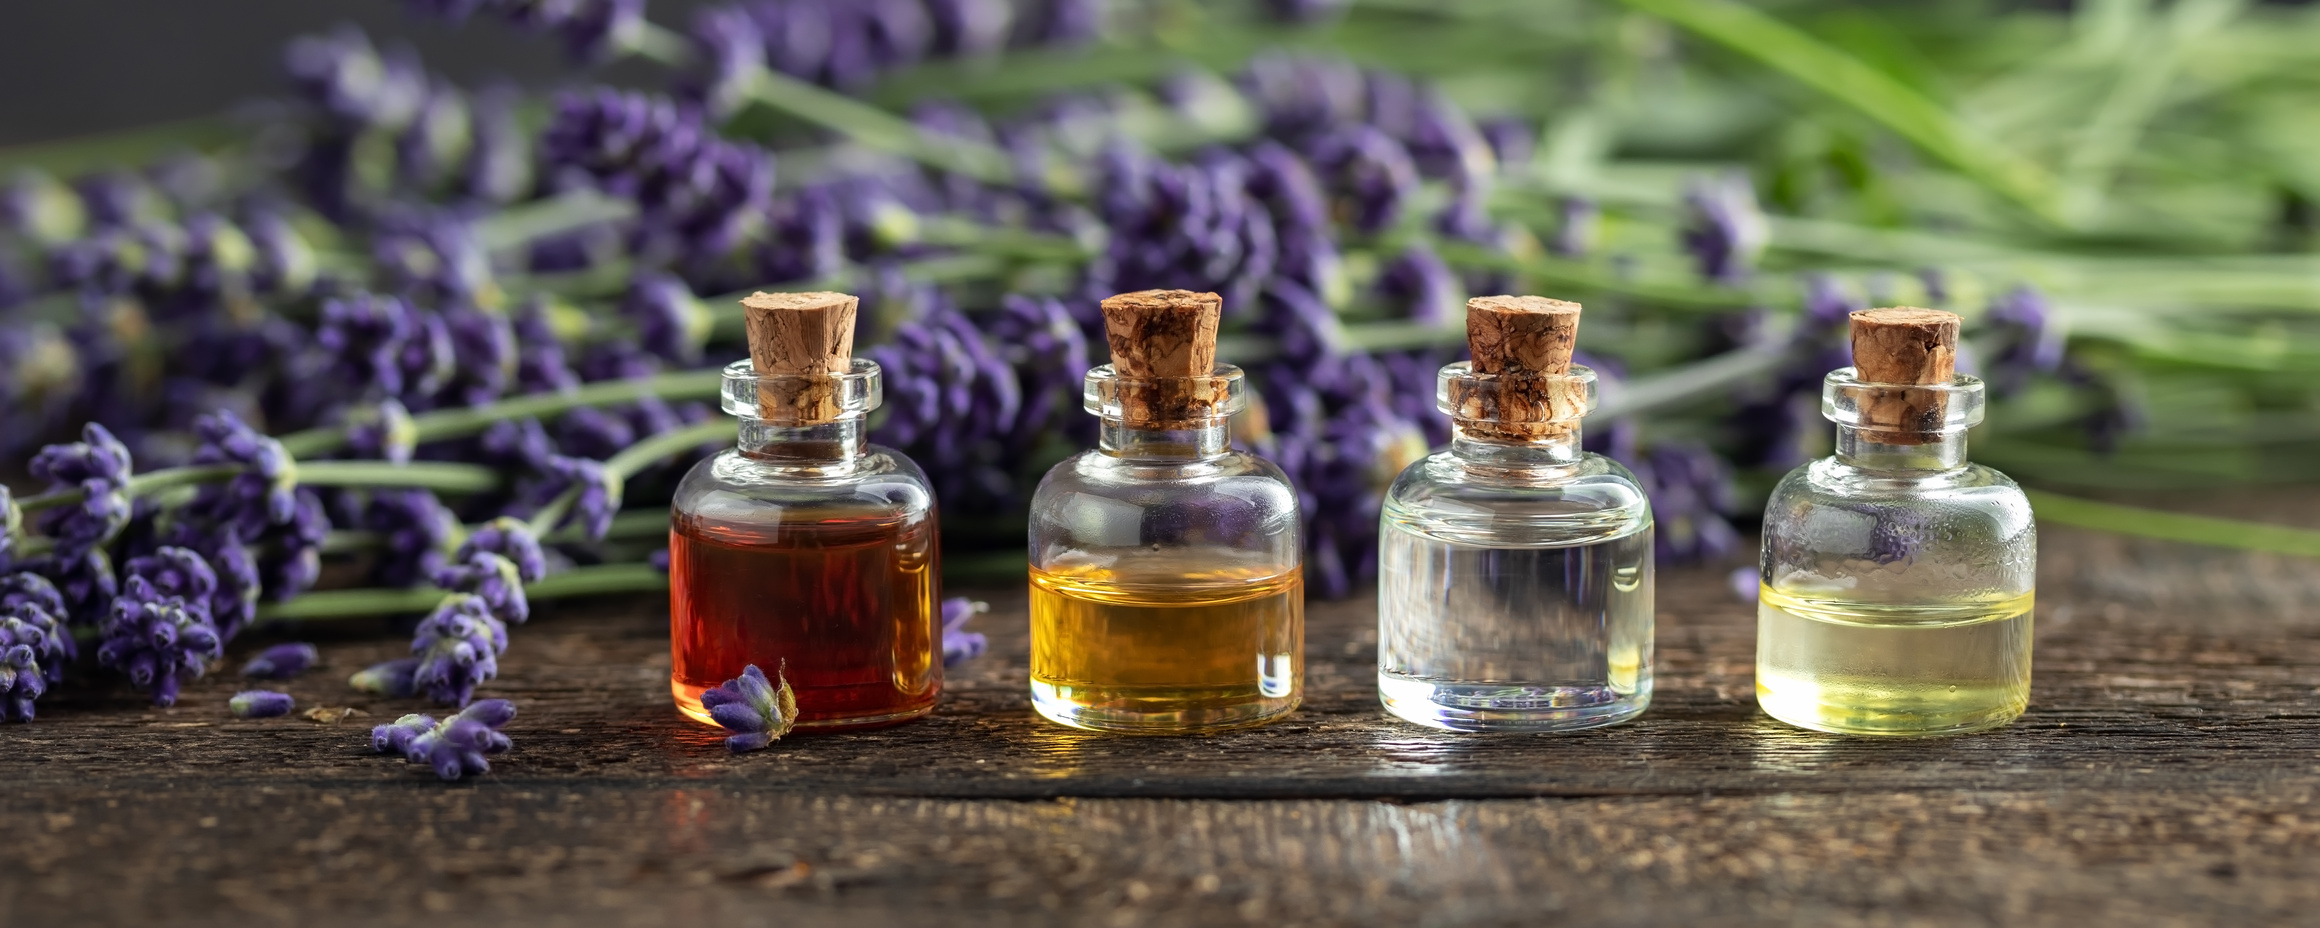 Essential Oil Bottles with Lavender